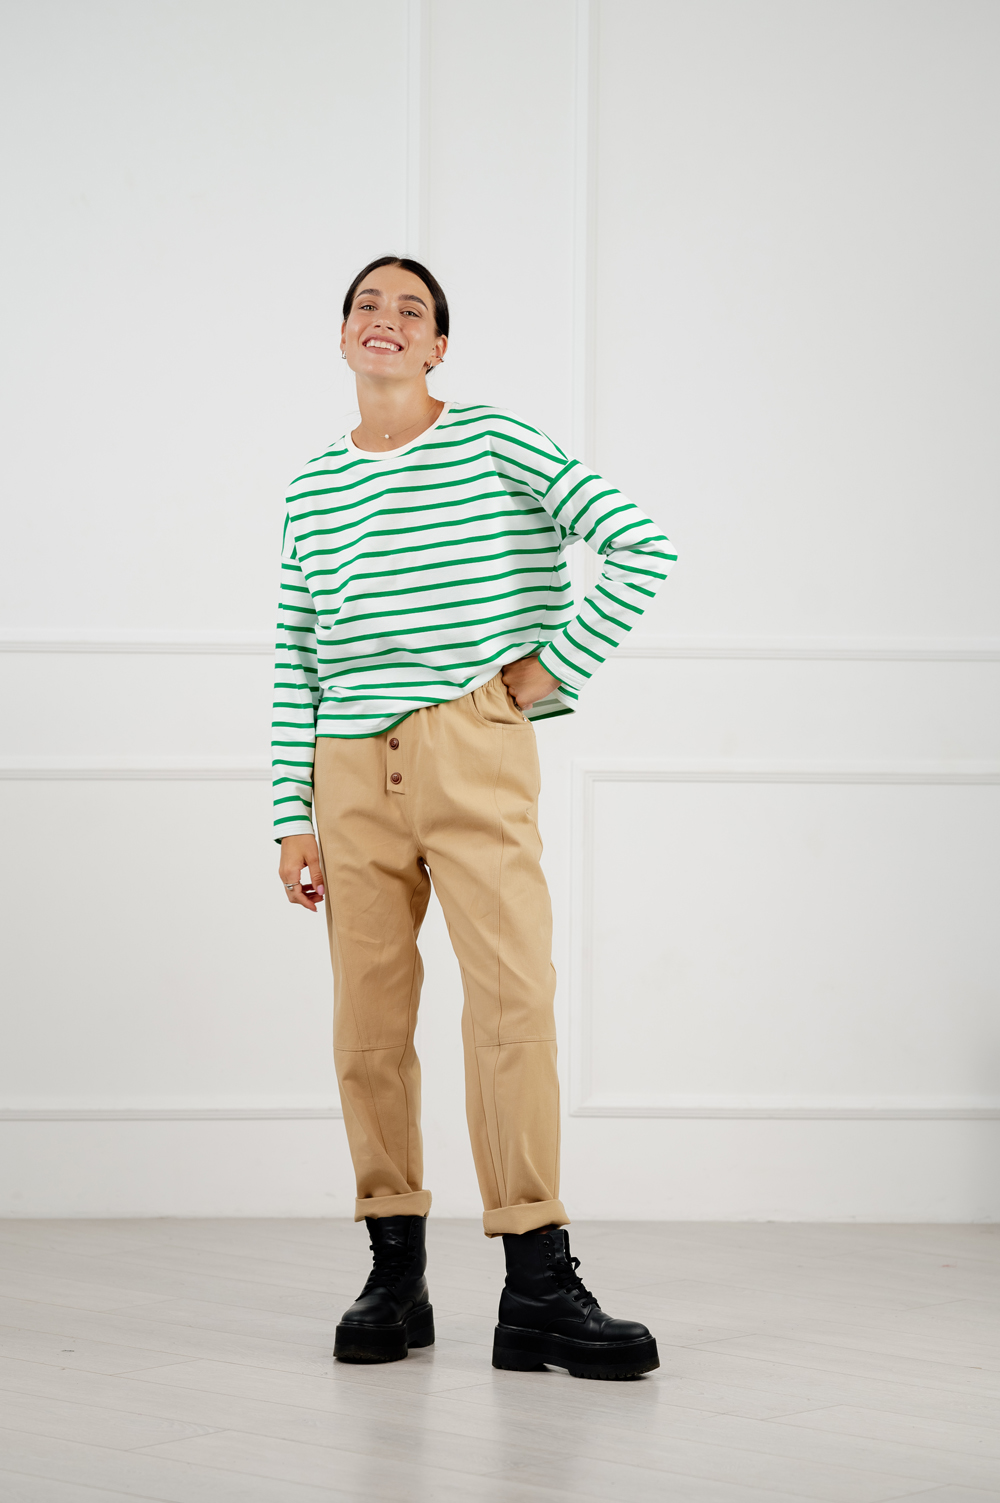 Green cropped sweatshirt with stripes.